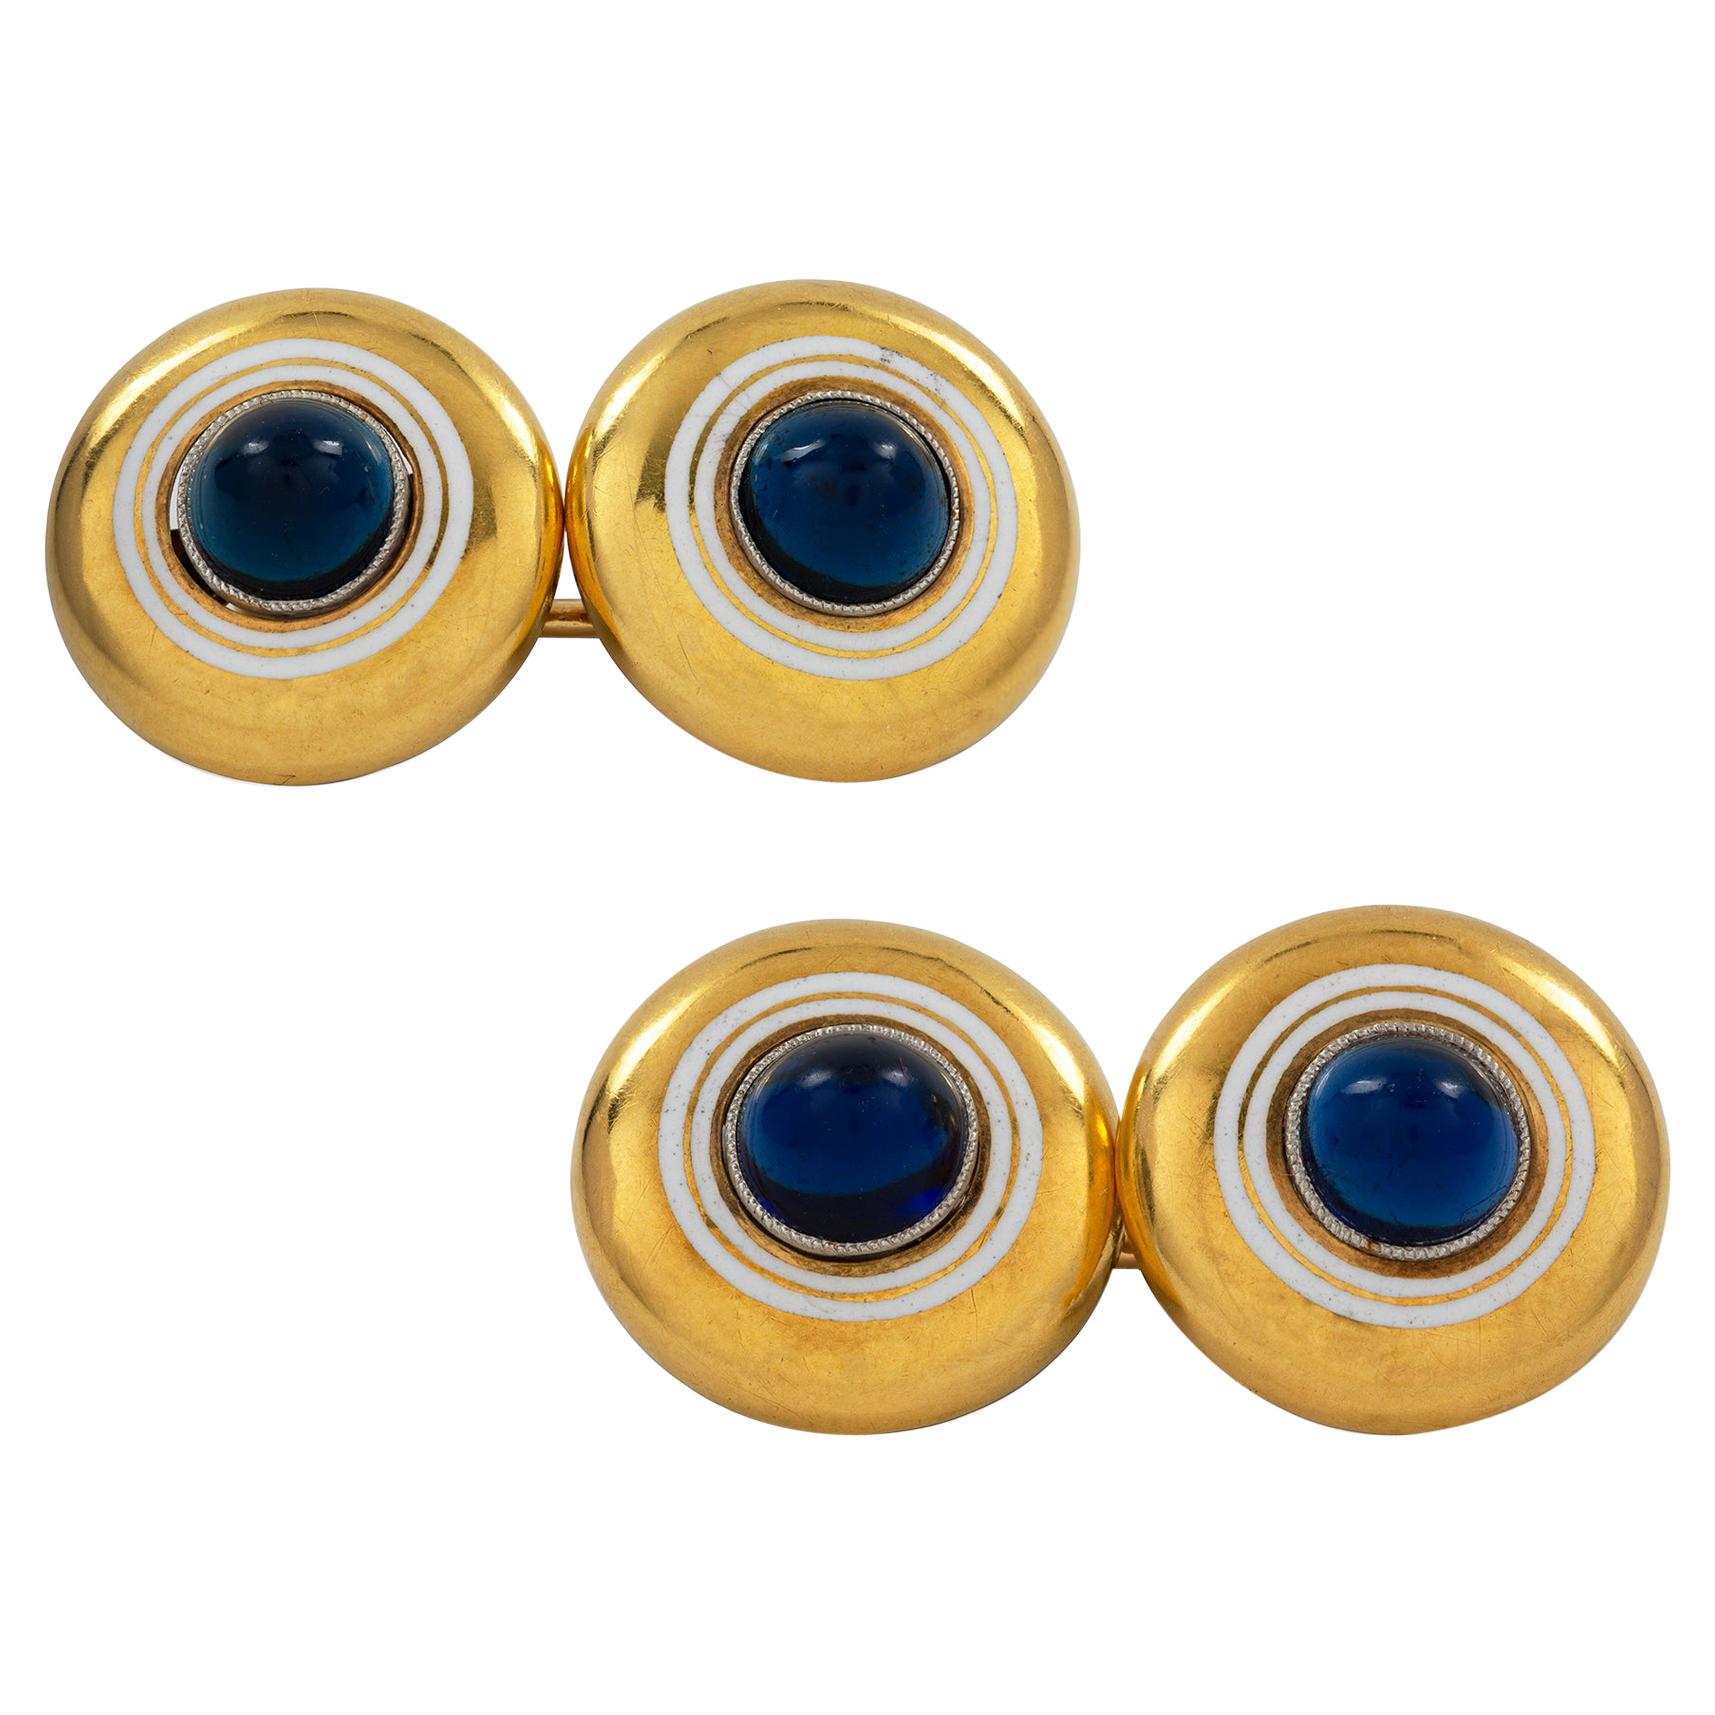 Pair of Cabochon Sapphire and Enamel Cufflinks